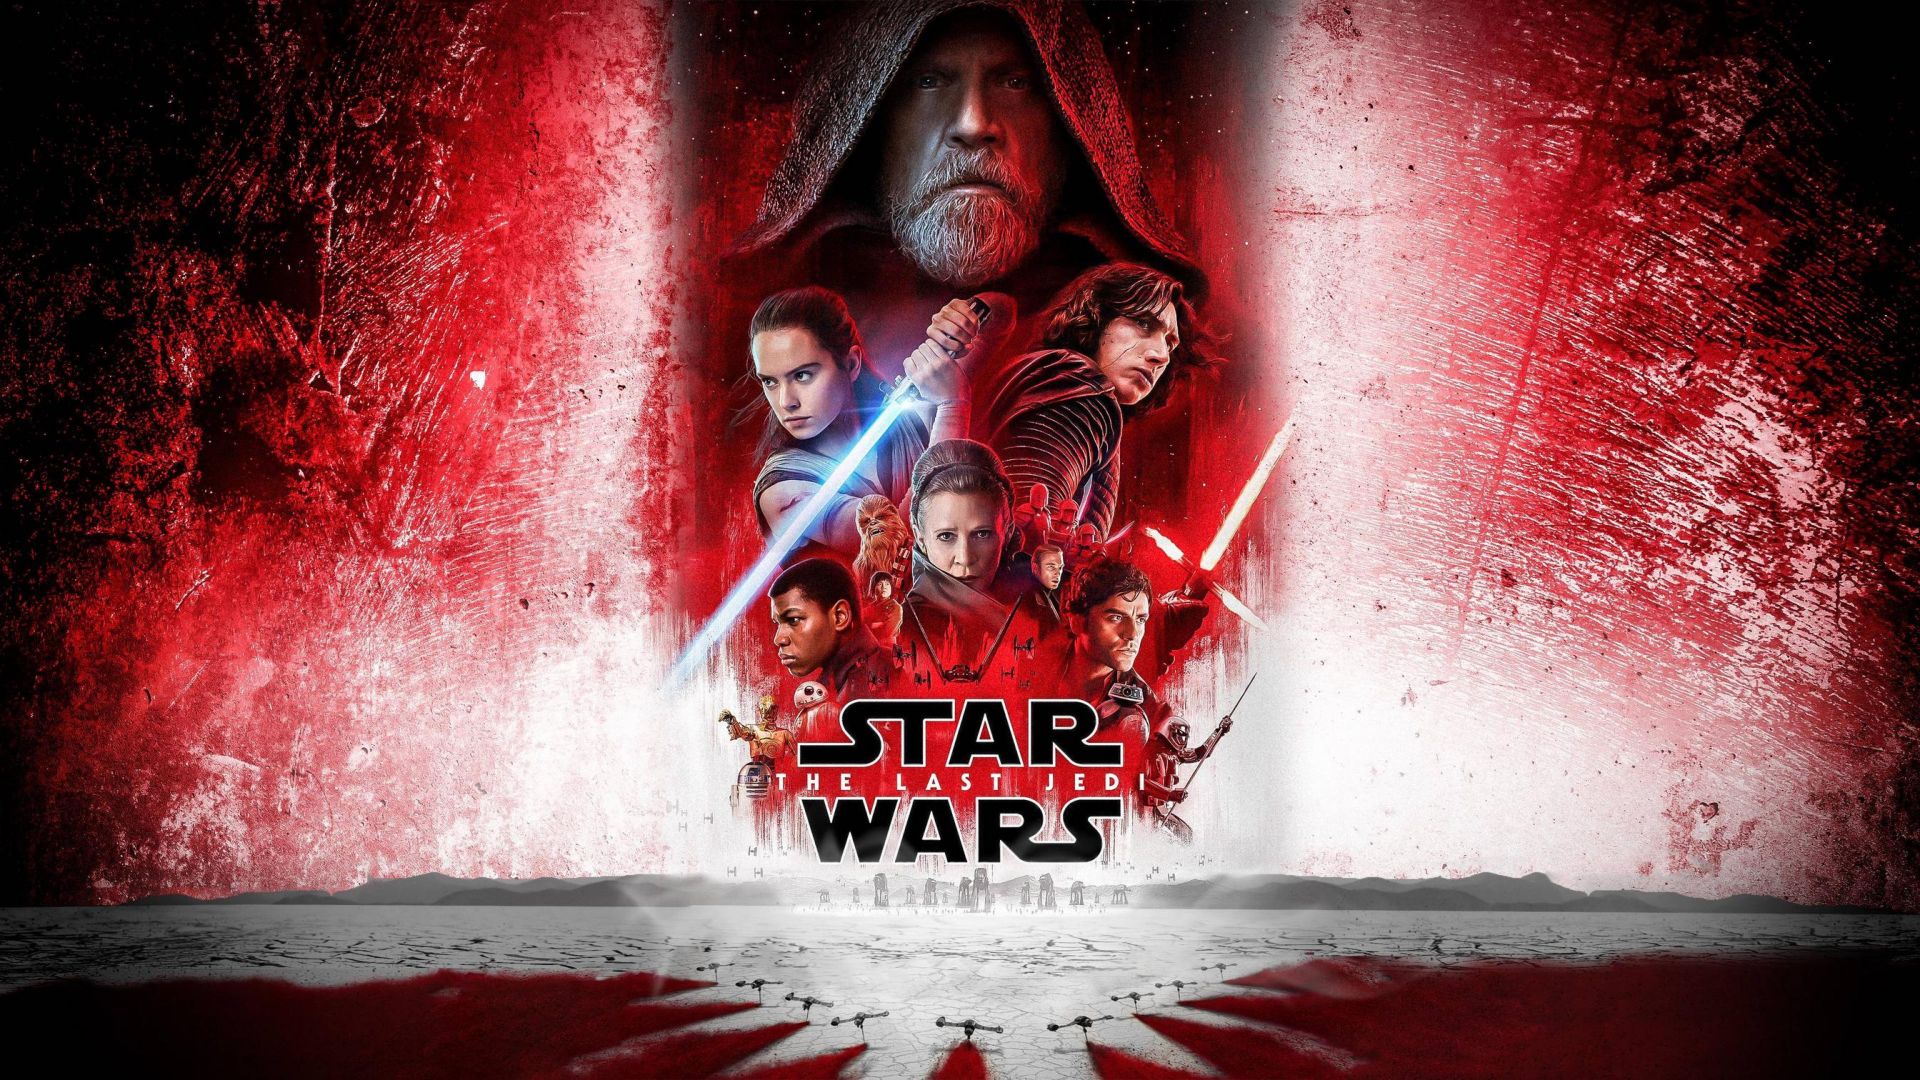 Star Wars: The Last Jedi, Daisy Ridley, Carrie Fisher, Adam Driver, poster, 8k (horizontal)